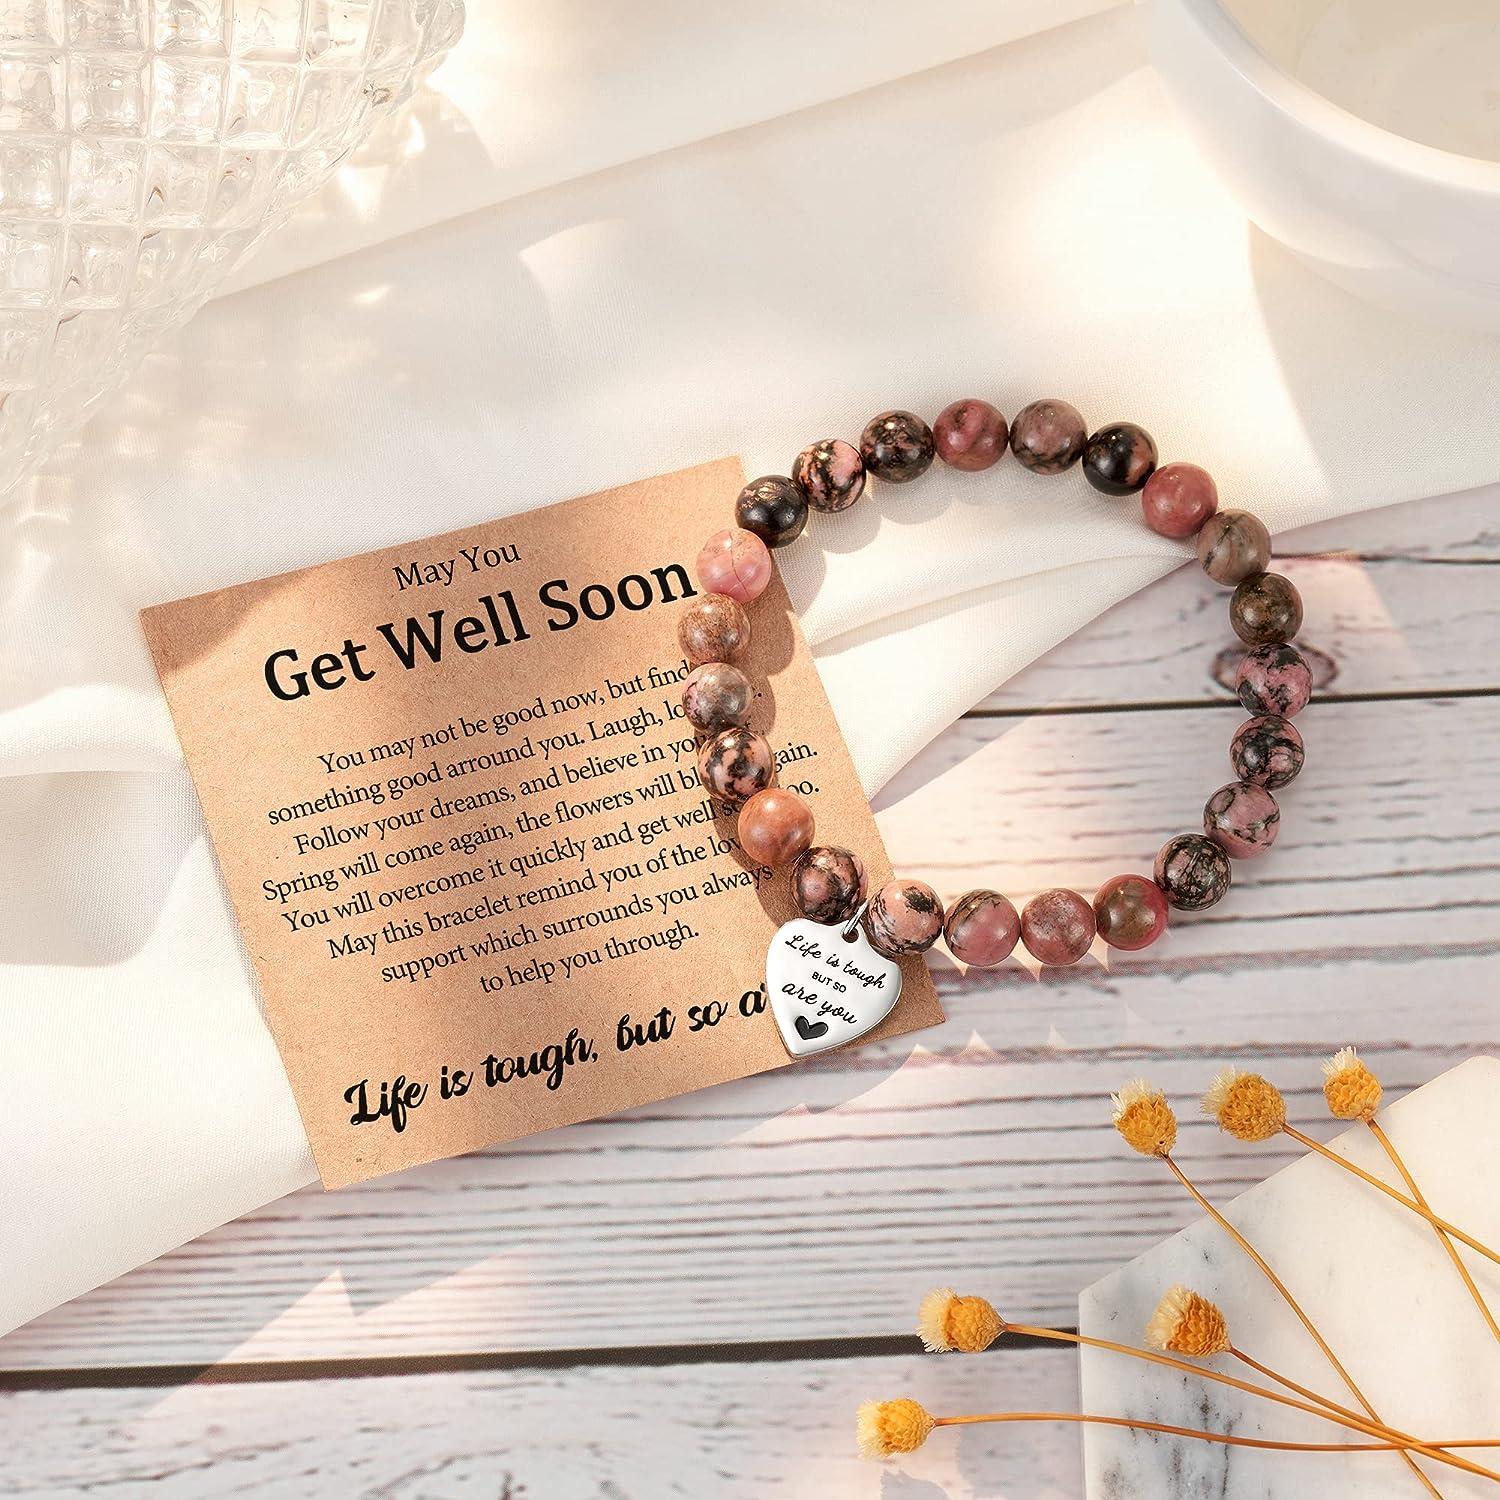 MIXJOY Get Well Soon Gifts for Women - Life is Tough But So are You Natural  Stone Bracelet, Anti-Anxiety Relaxation Gifts